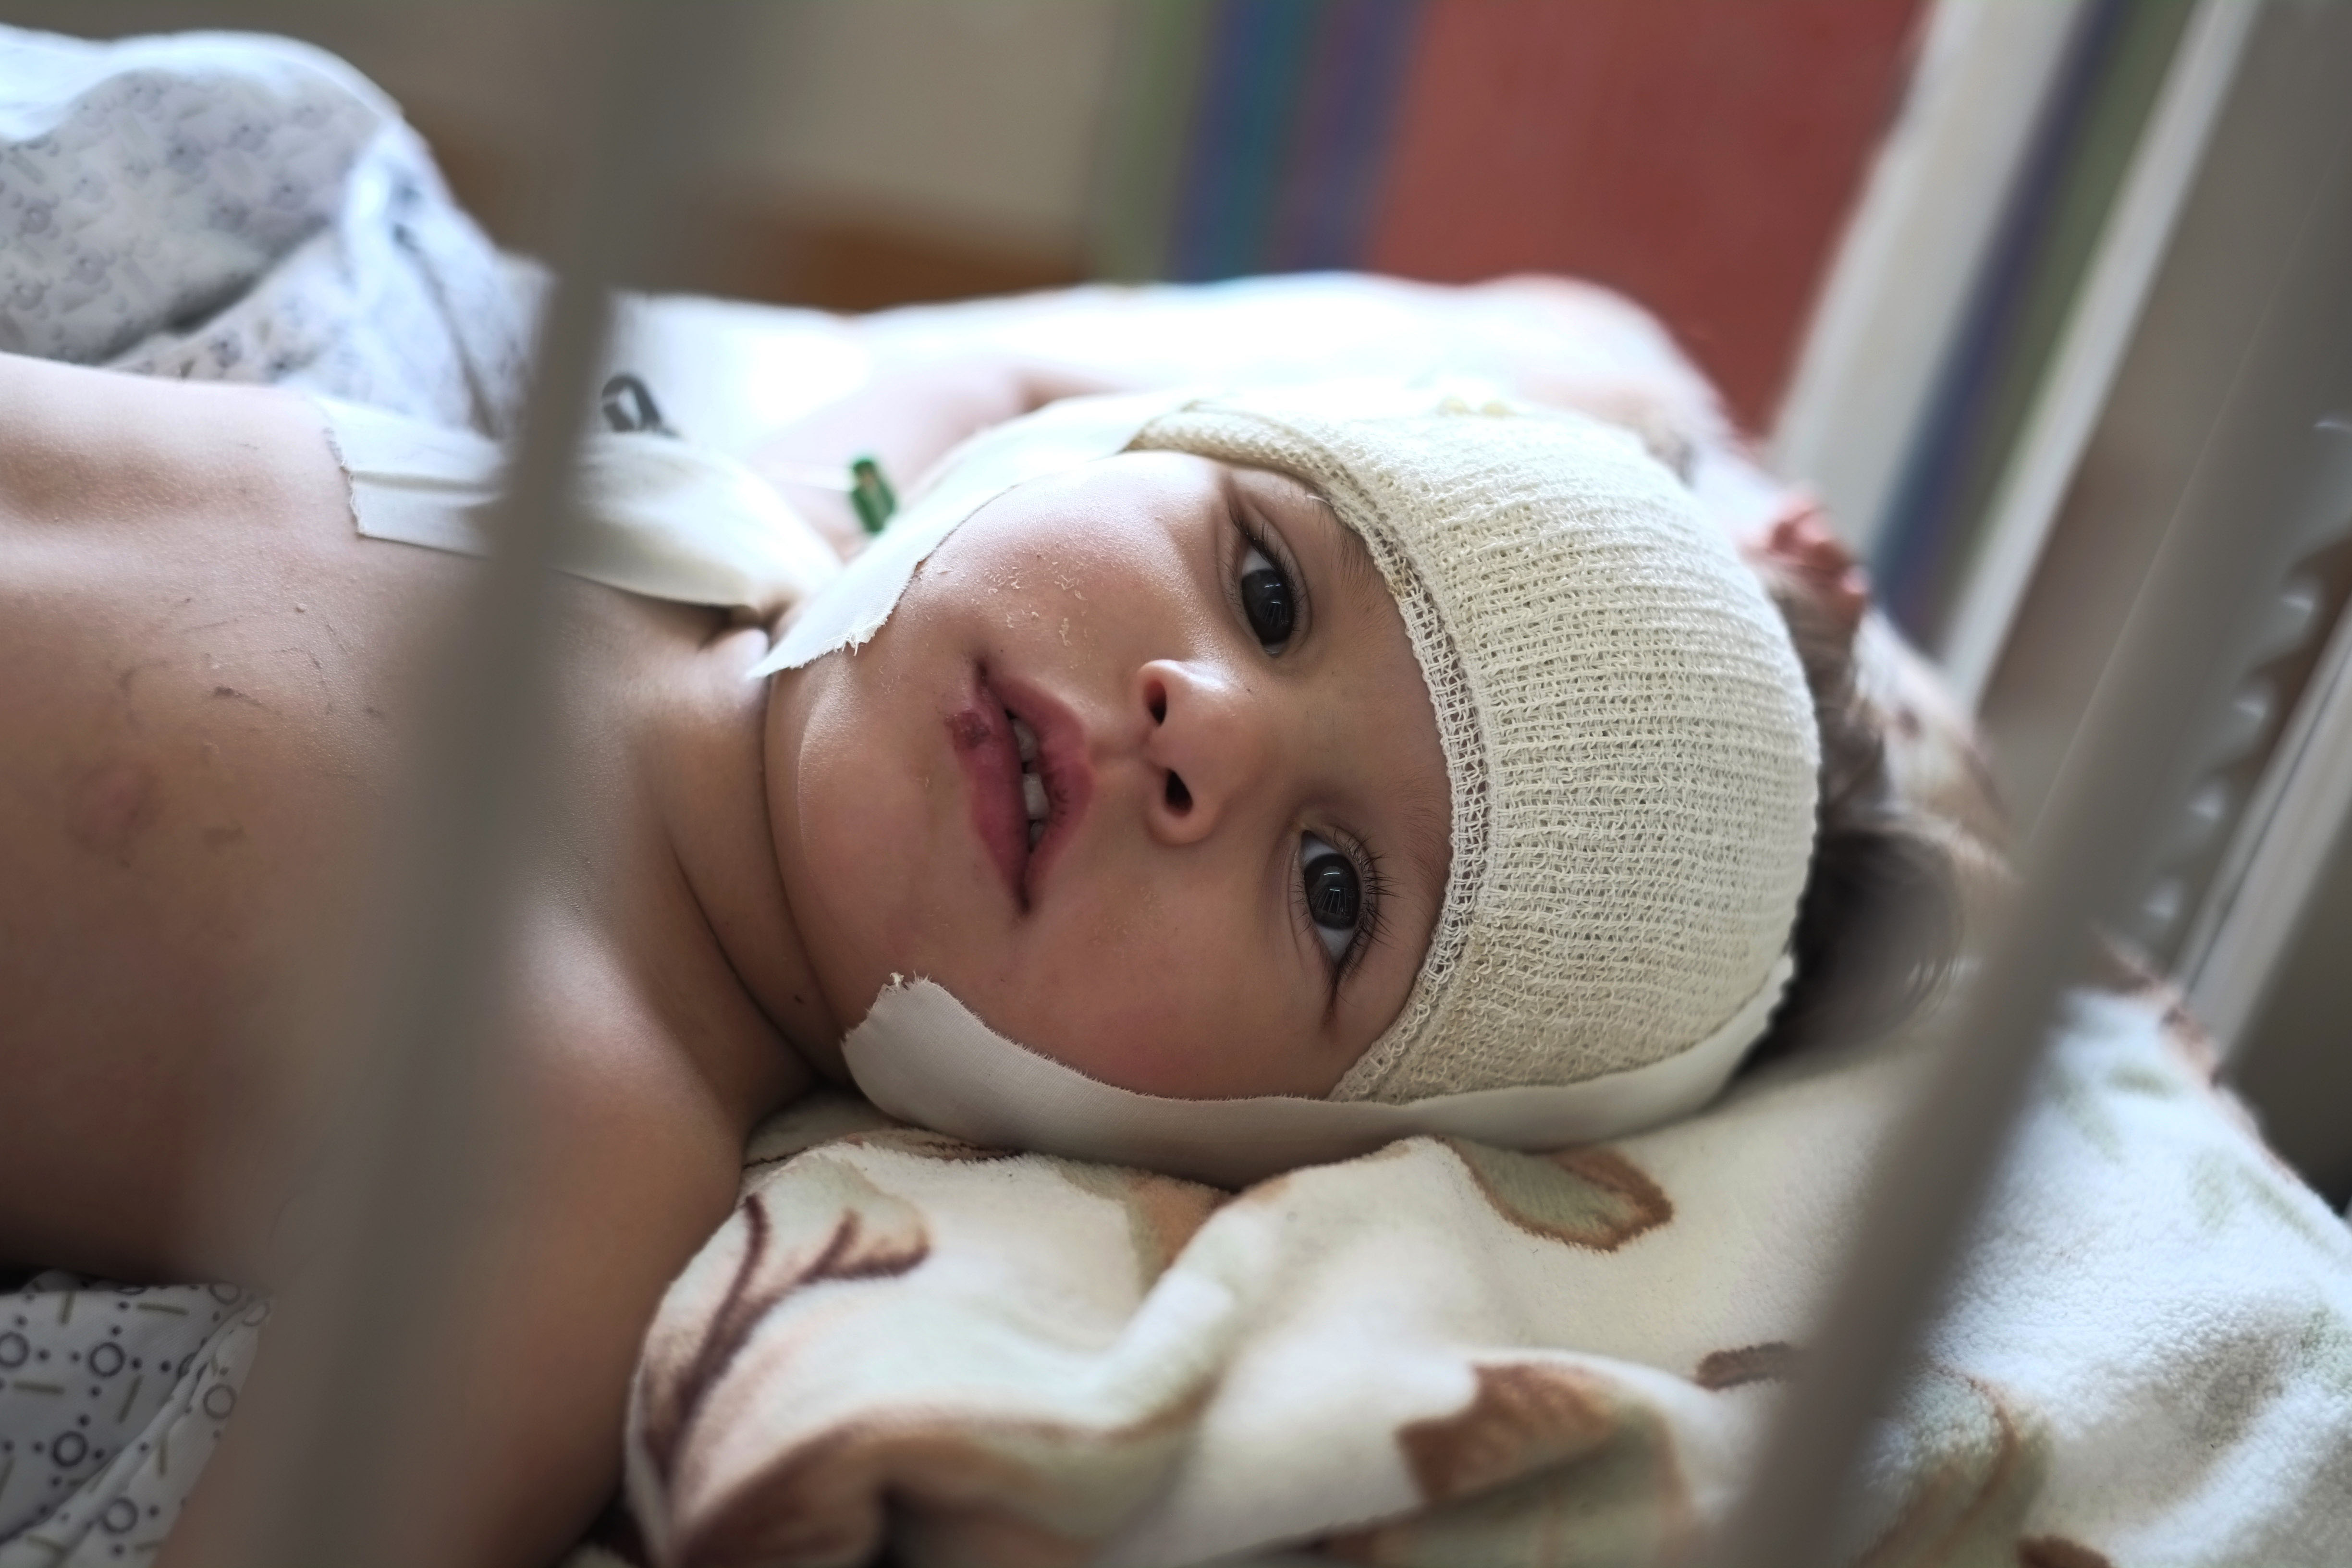 Palestinian Sama al-Ajouz, 2, lays on a hospital bed in Gaza City. Al-Ajouz was wounded by shrapnel on the scull during an Israeli strike. Photo: AP